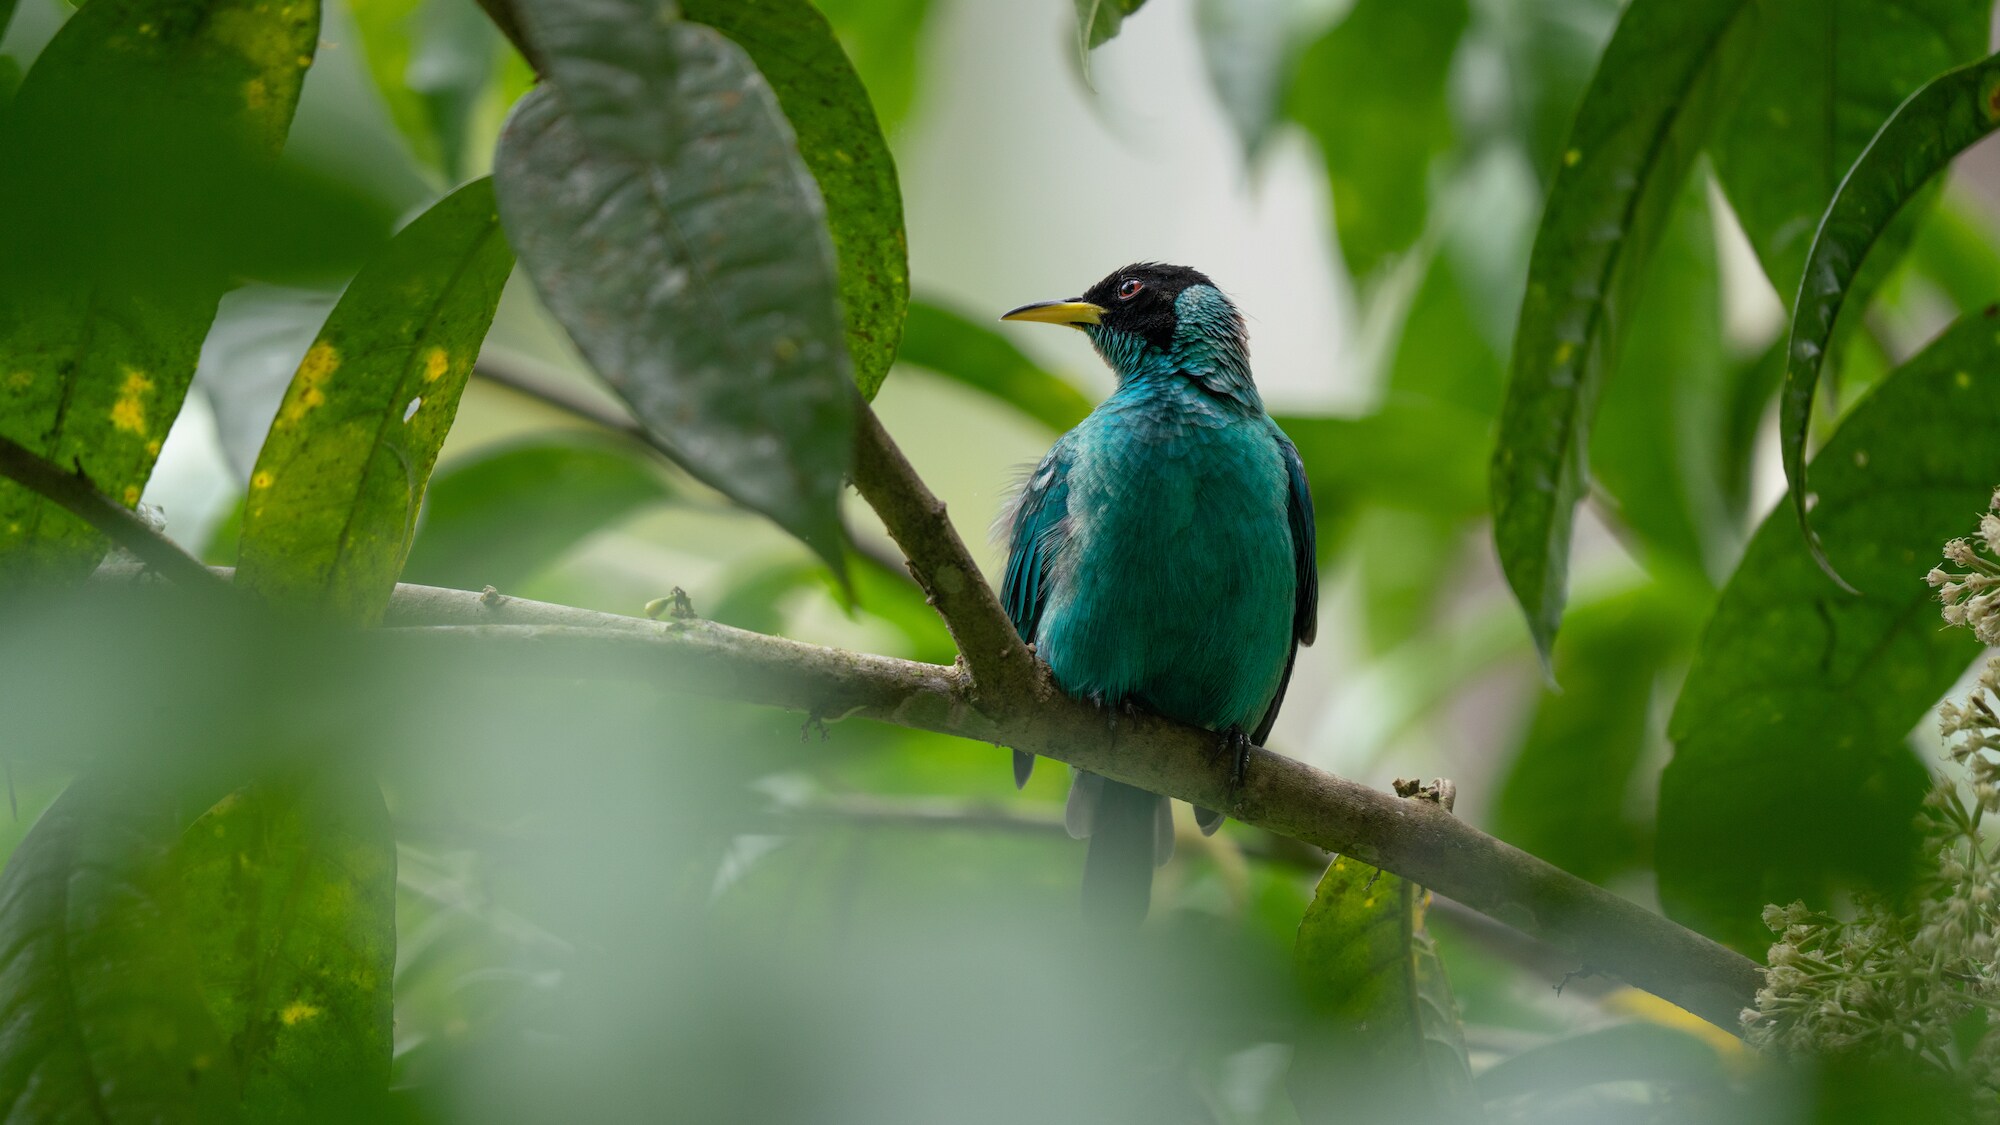 Male green honeycreeper in a tree. (National Geographic for Disney+/Chris Watts)